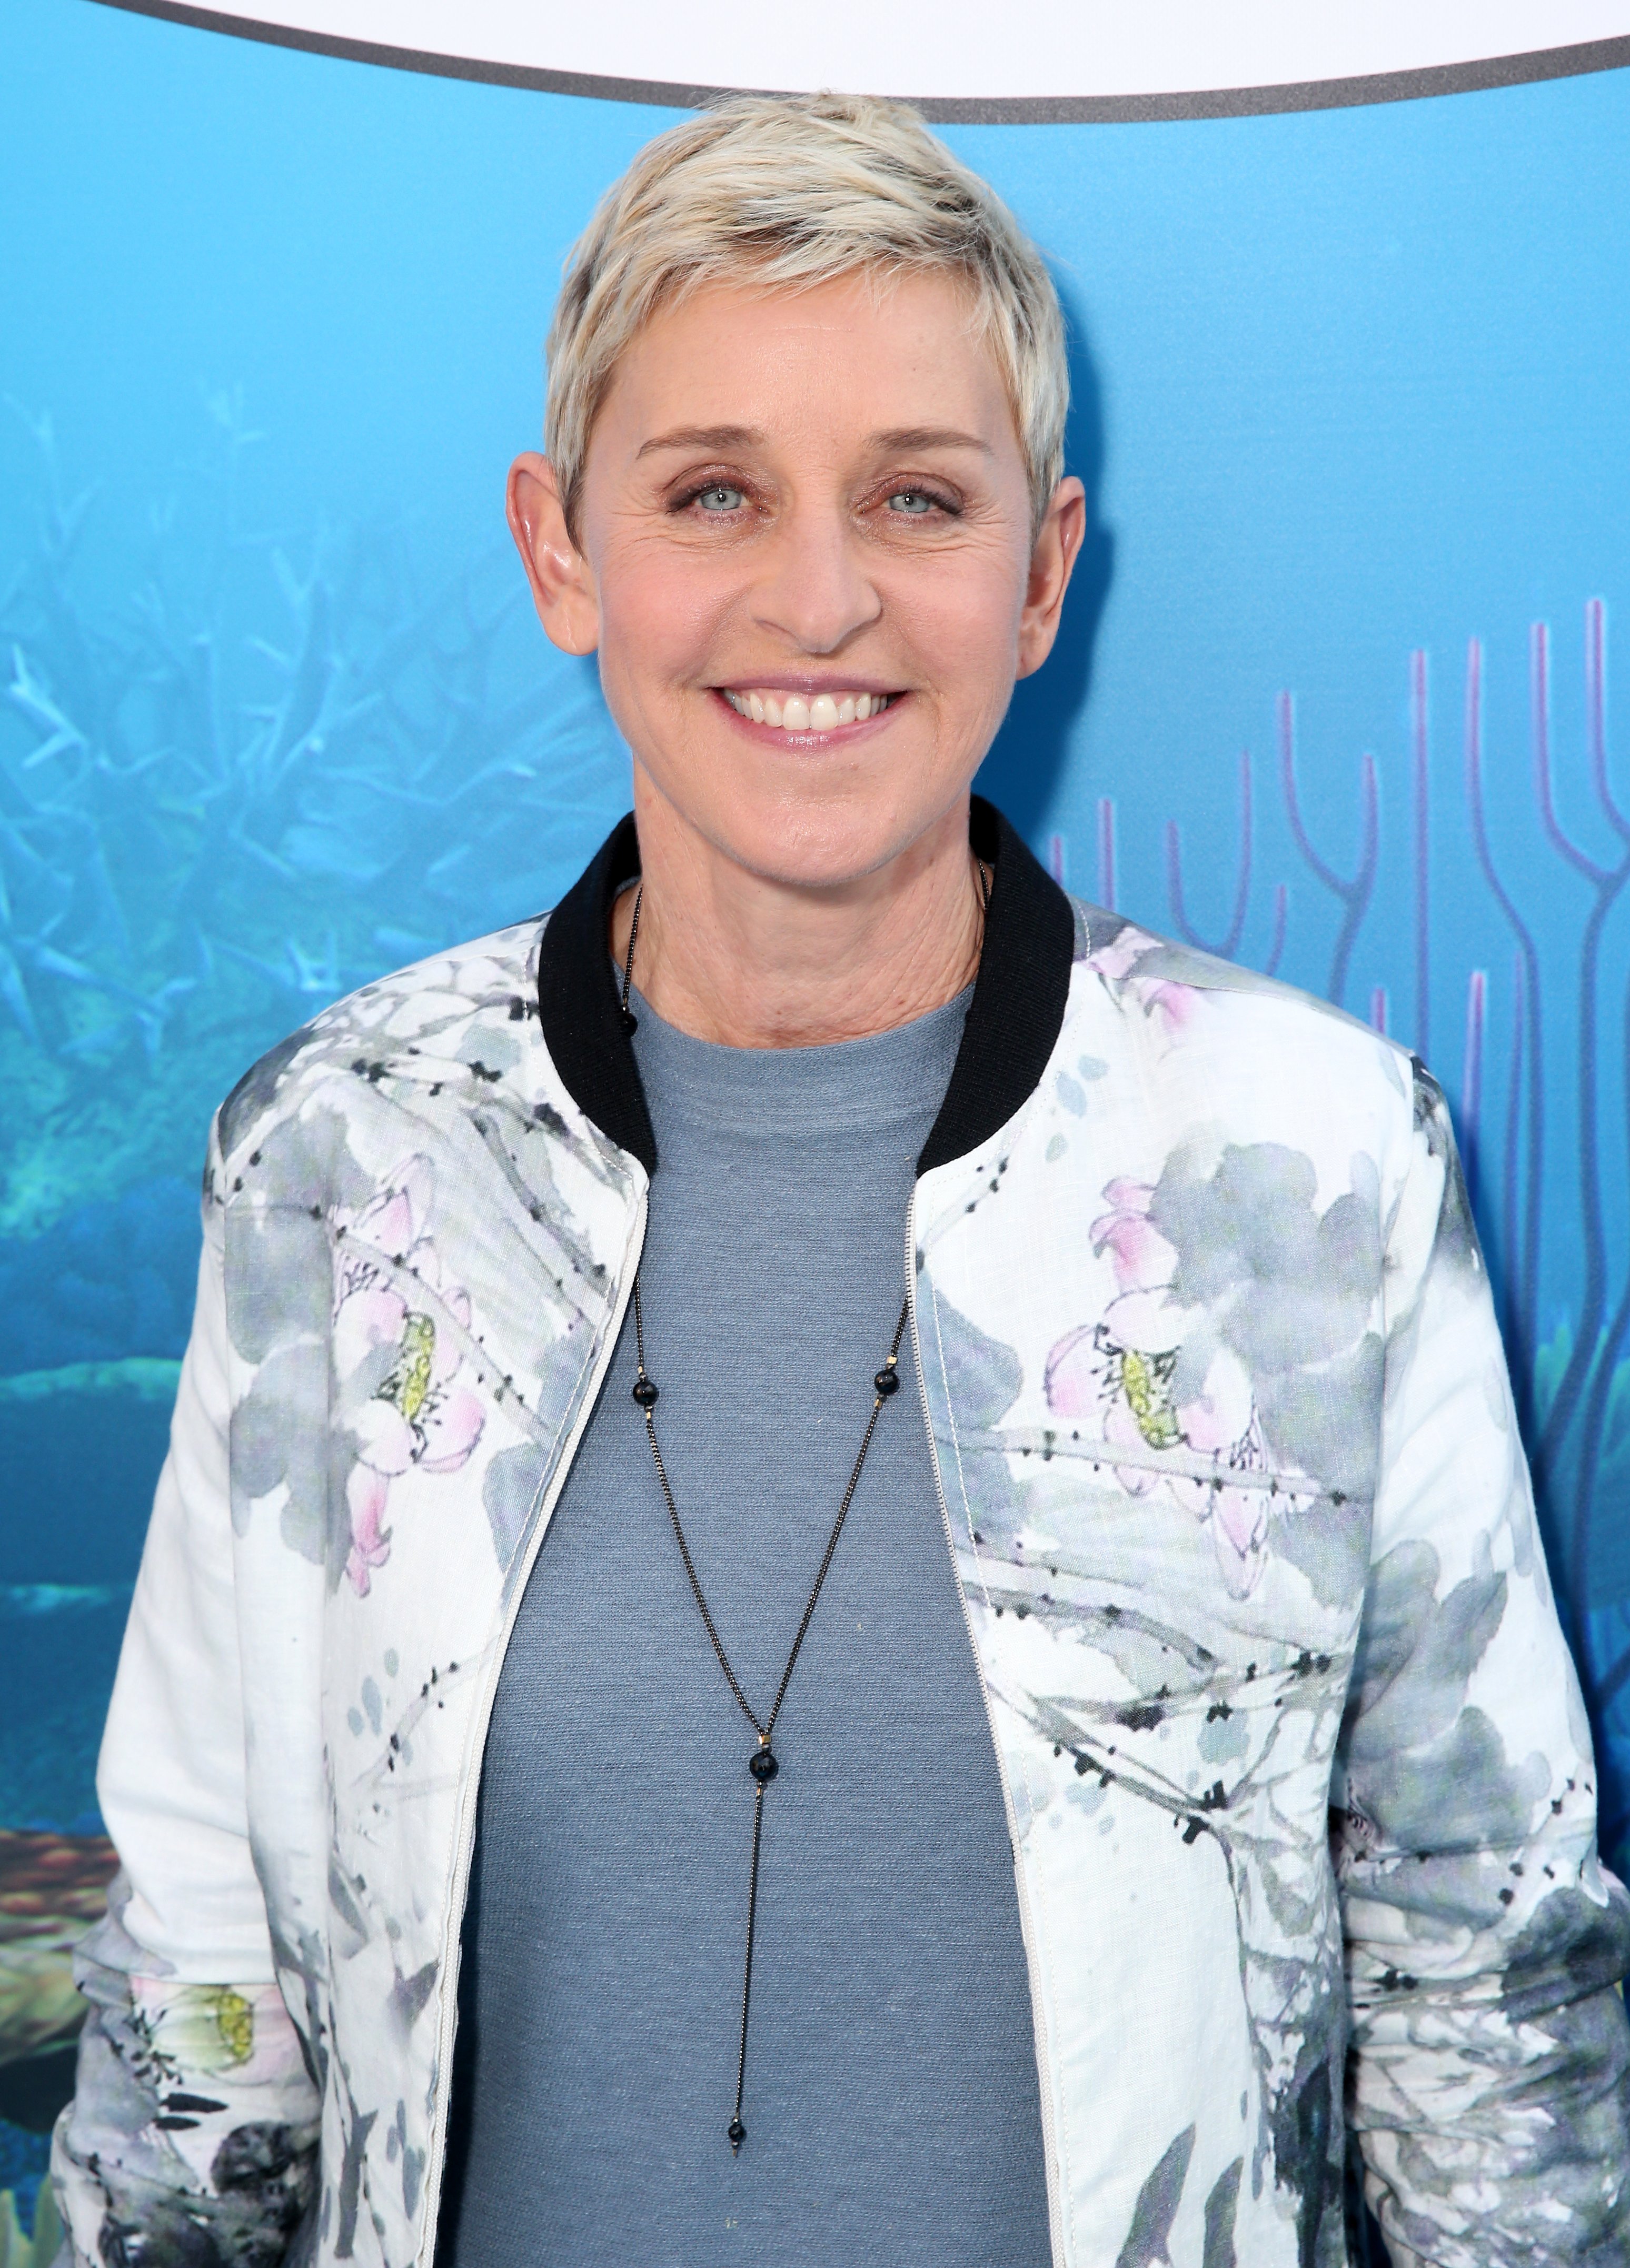 Ellen DeGeneres attends the world premiere of Disney-Pixar's 'Finding Dory' at the El Capitan Theatre on June 8, 2016, in Hollywood, California. | Source: Getty Images.